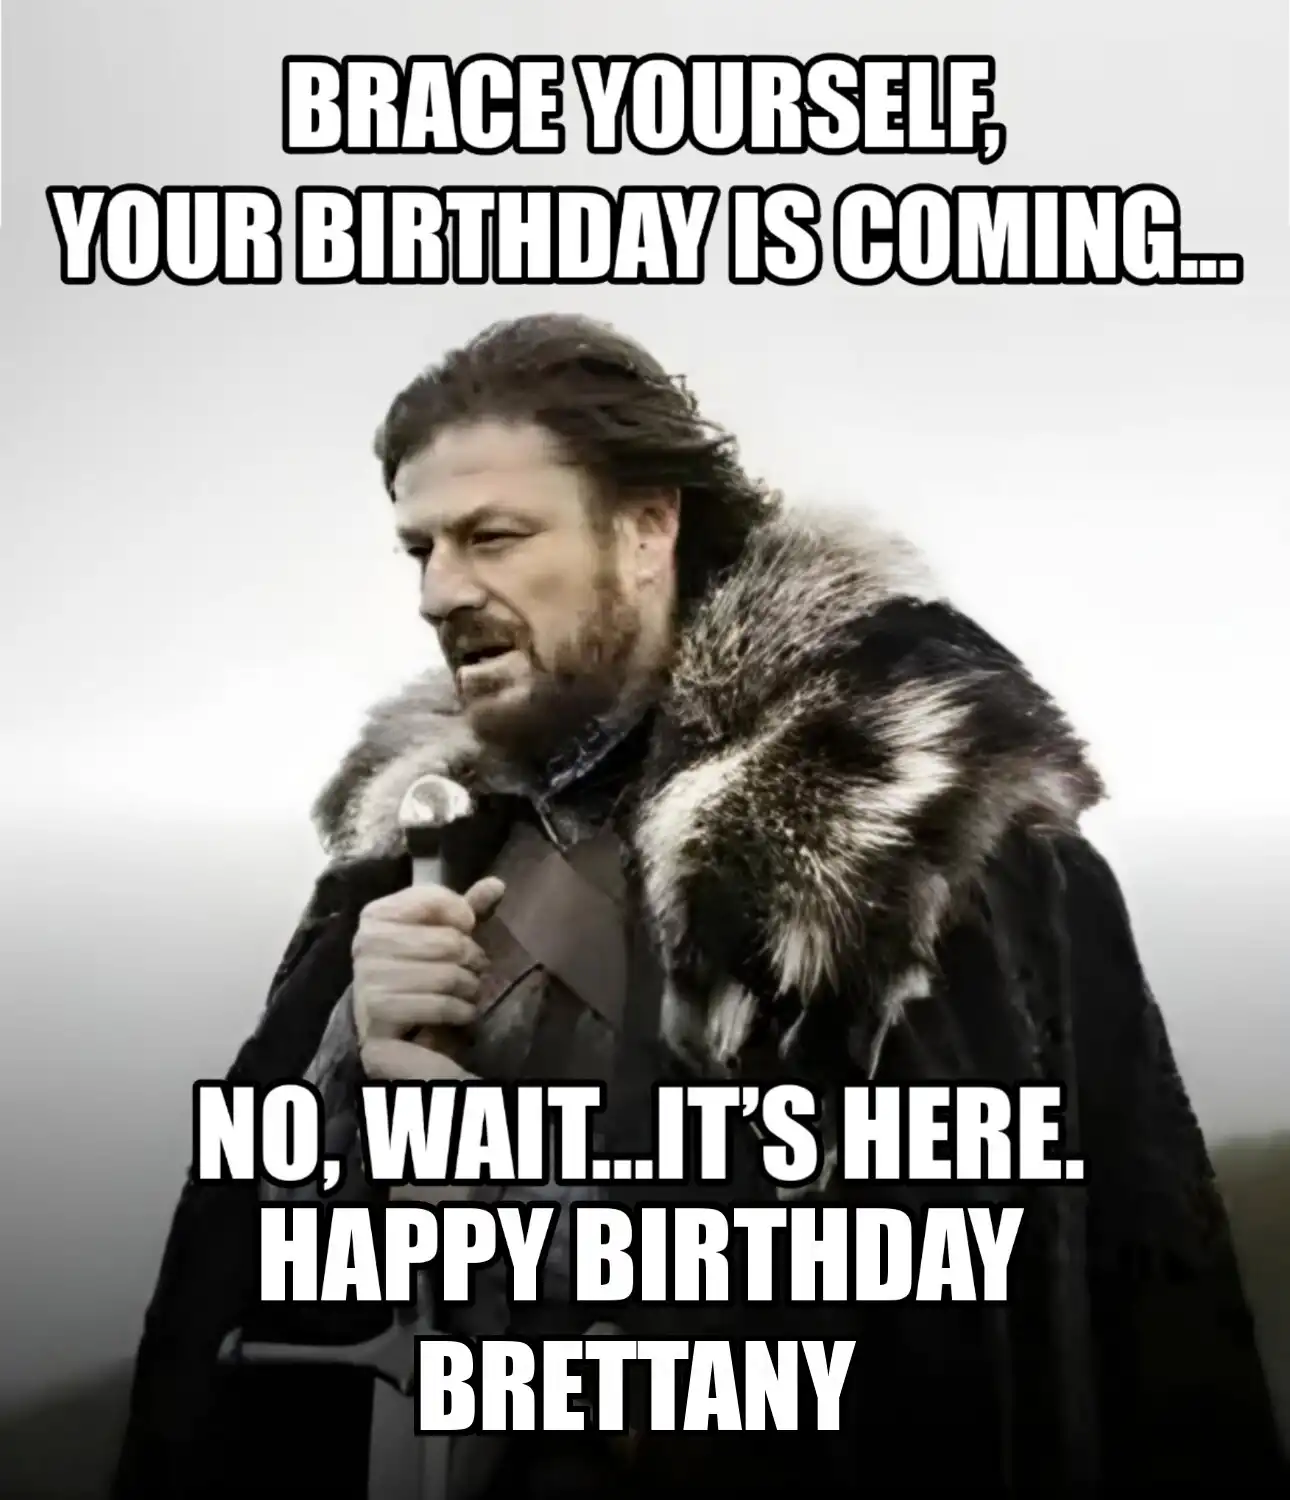 Happy Birthday Brettany Brace Yourself Your Birthday Is Coming Meme